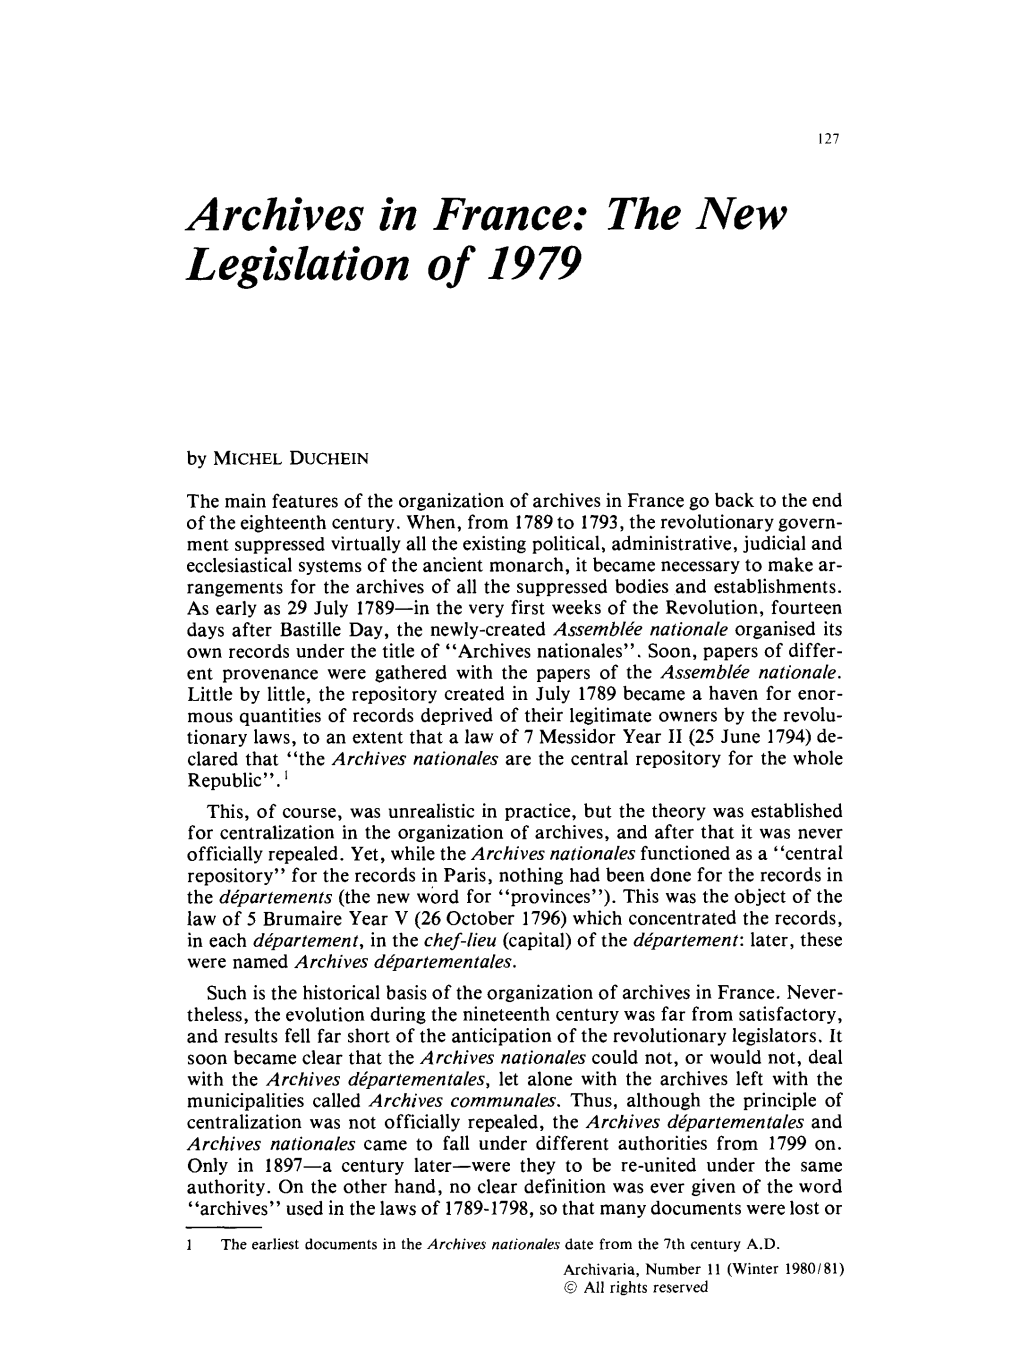 Archives in France: the New Legislation of 1979